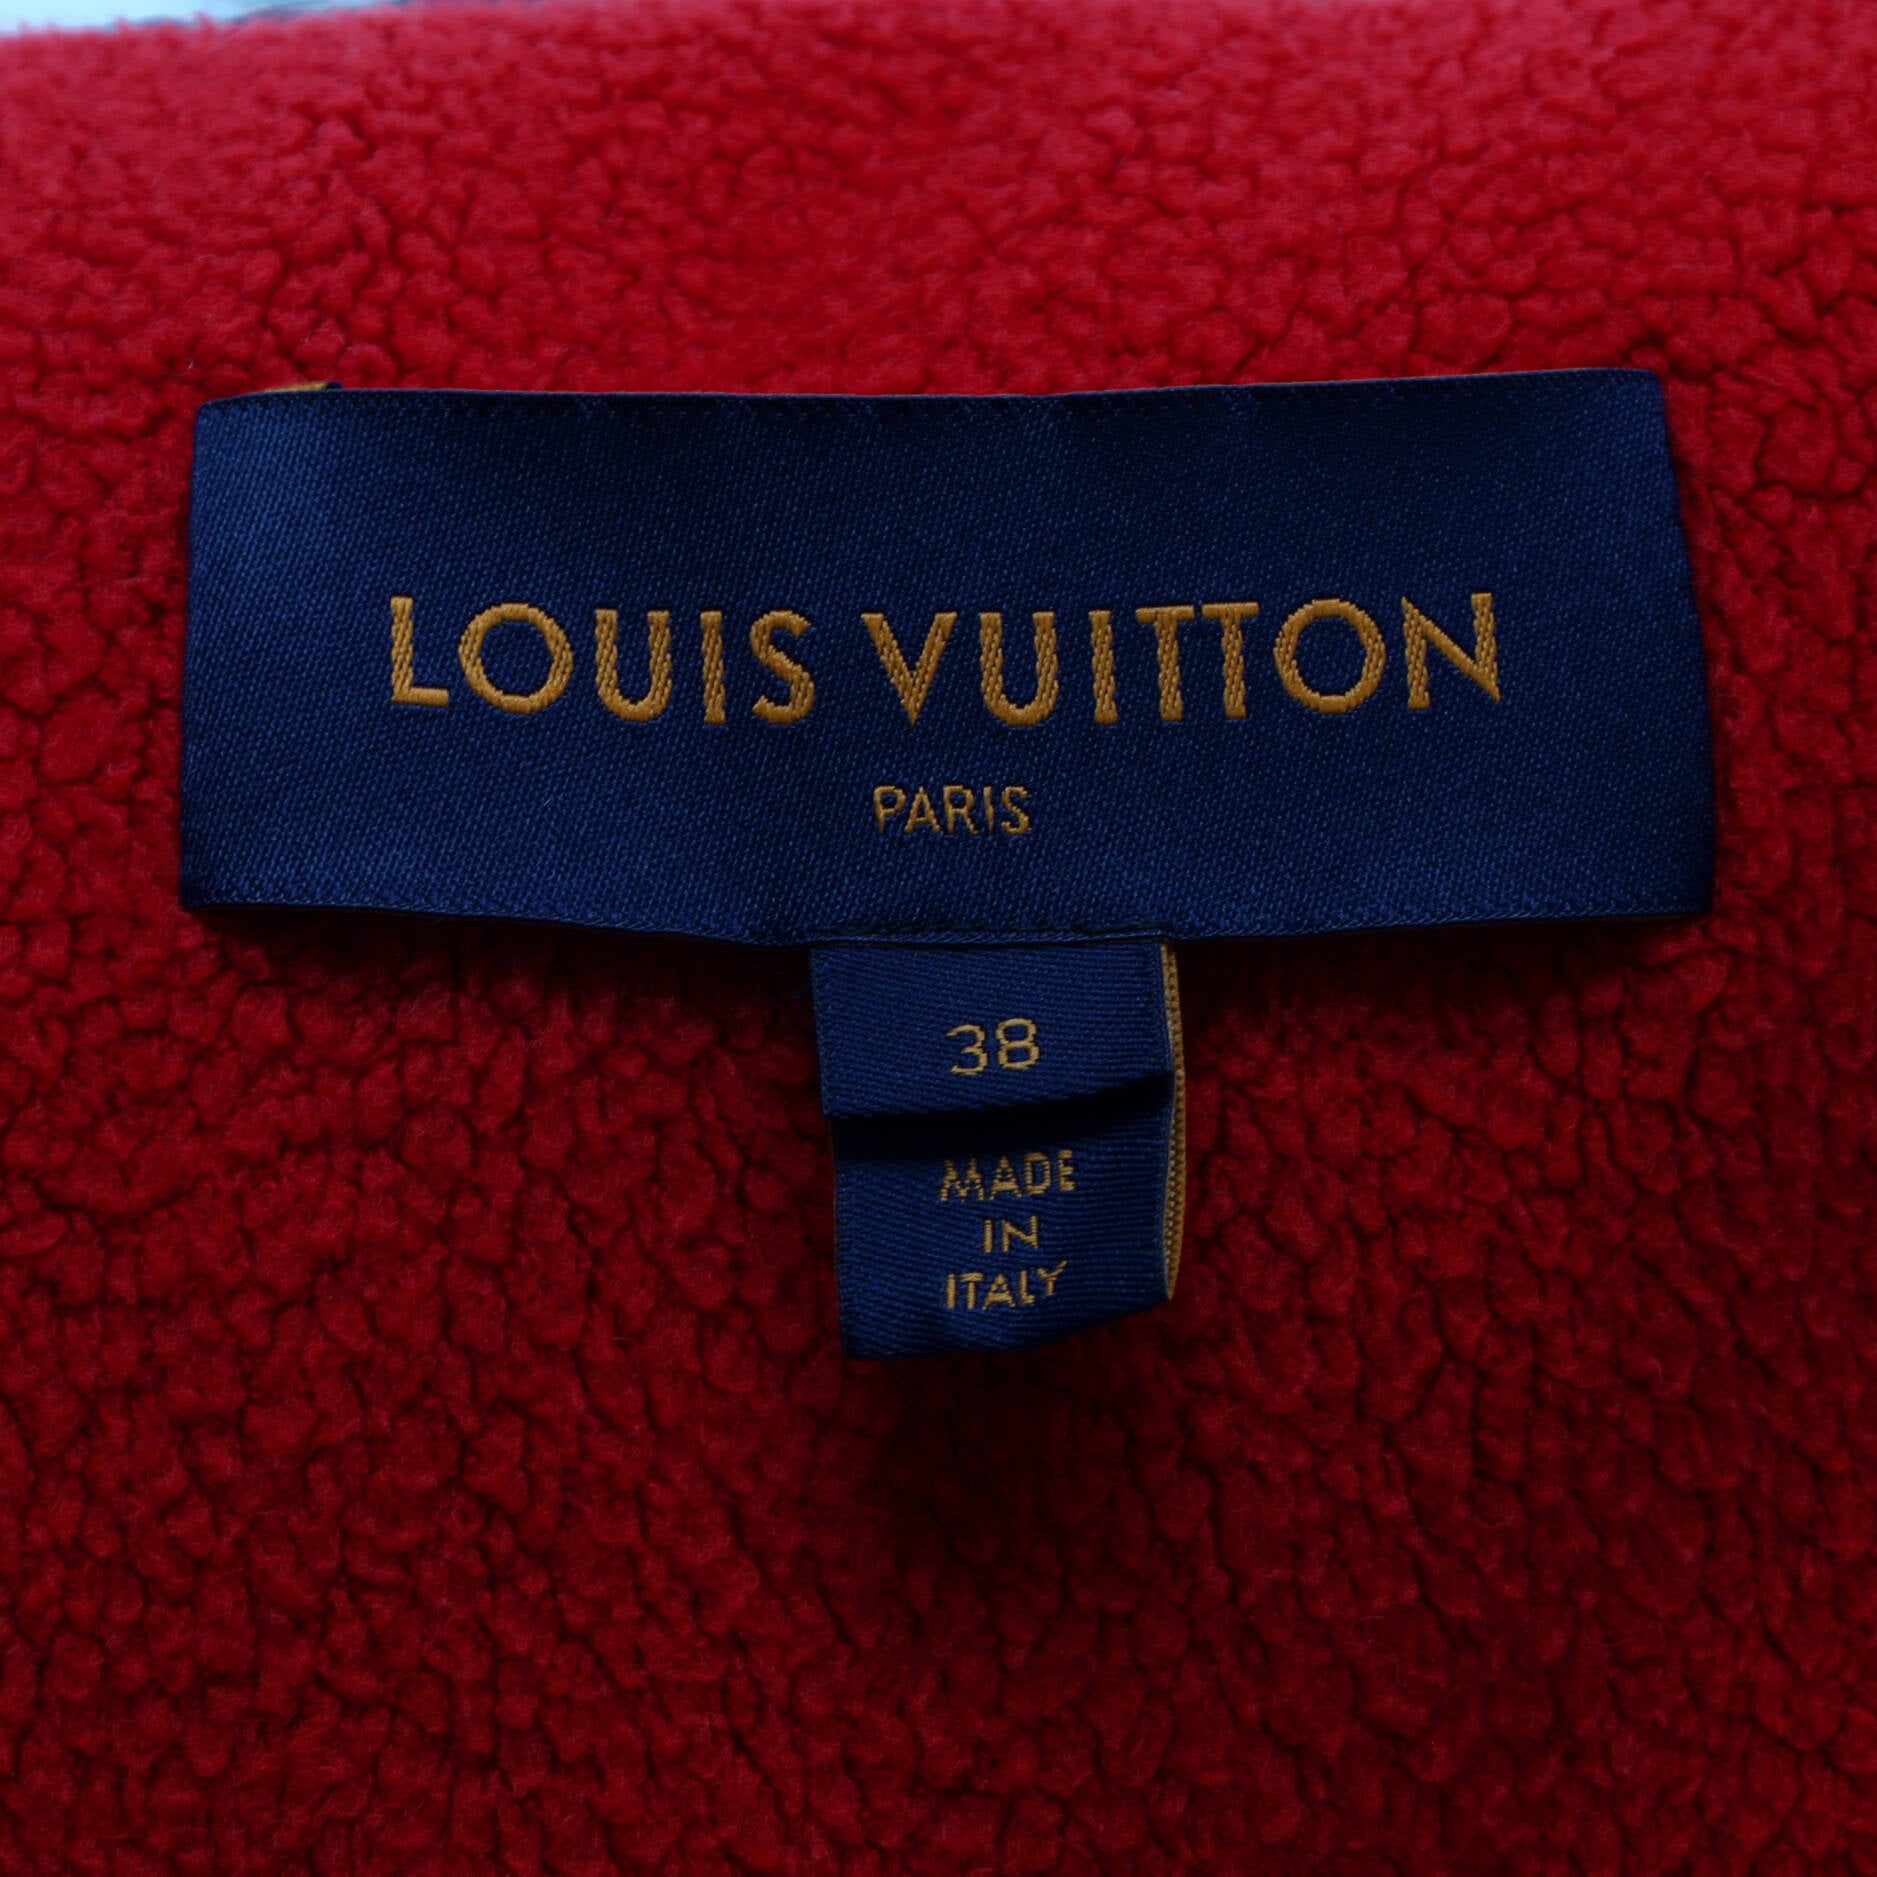 Louis Vuitton Double-Sided Coat Red Wool. Size 6 Months